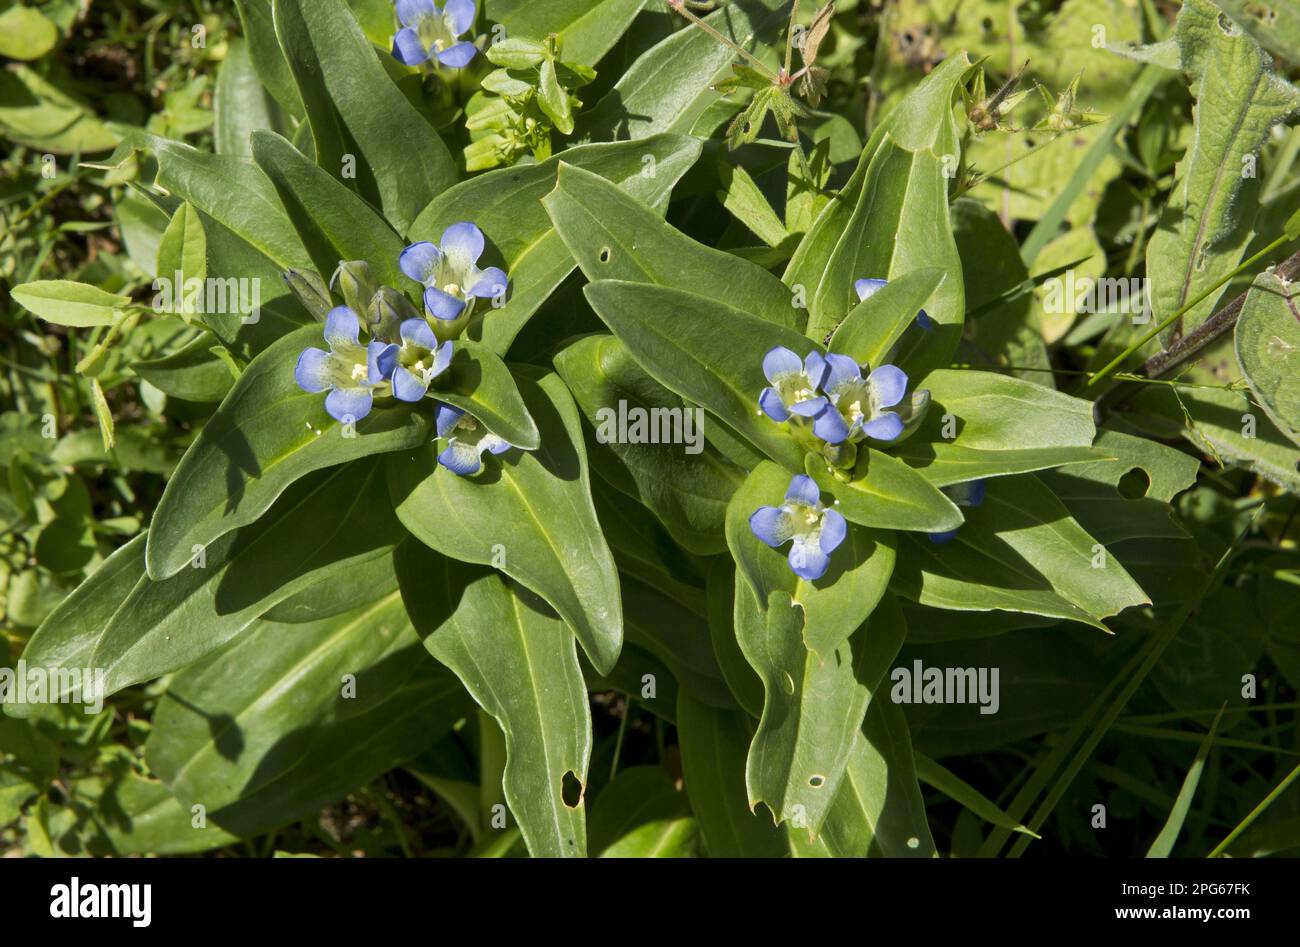 Flowering star gentian (Gentiana cruciata) with eggs of the blue mountain alcon blue (Maculinea rebeli) on leaves, Pontic Mountains, Anatolia, Turkey Stock Photo